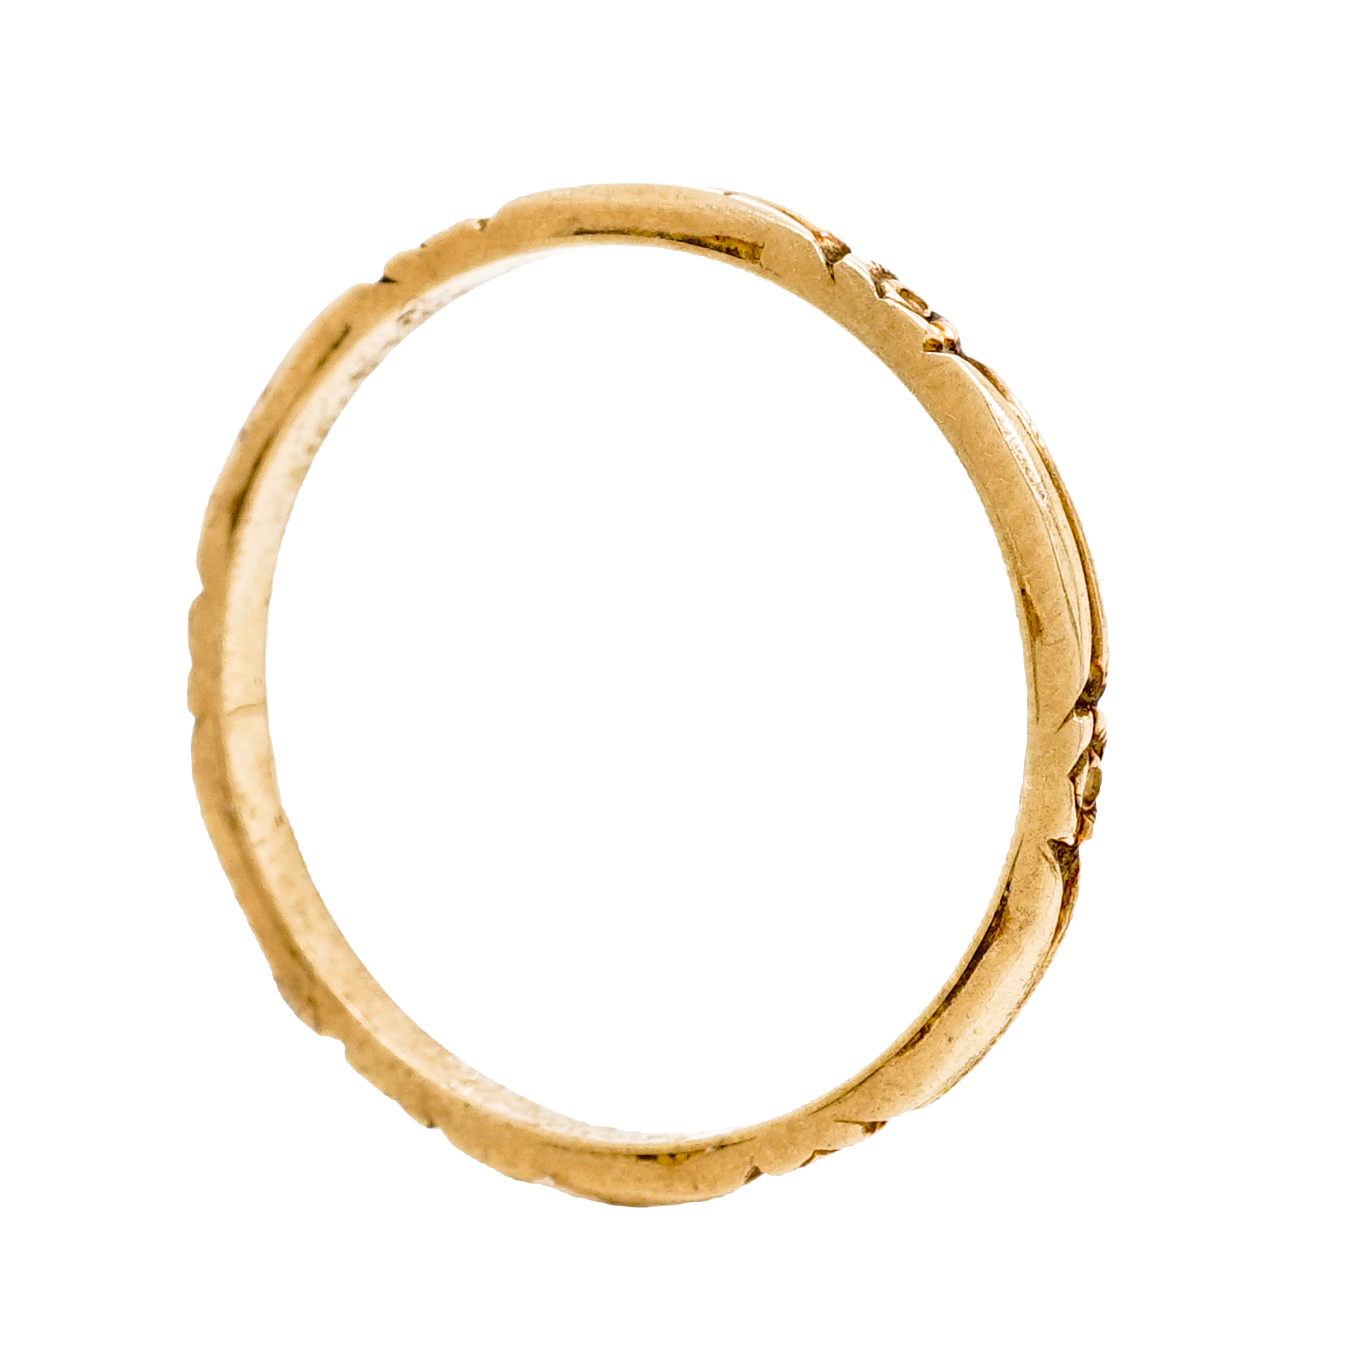 Thin Art Deco Engraved Wedding Band in 14k Yellow Gold